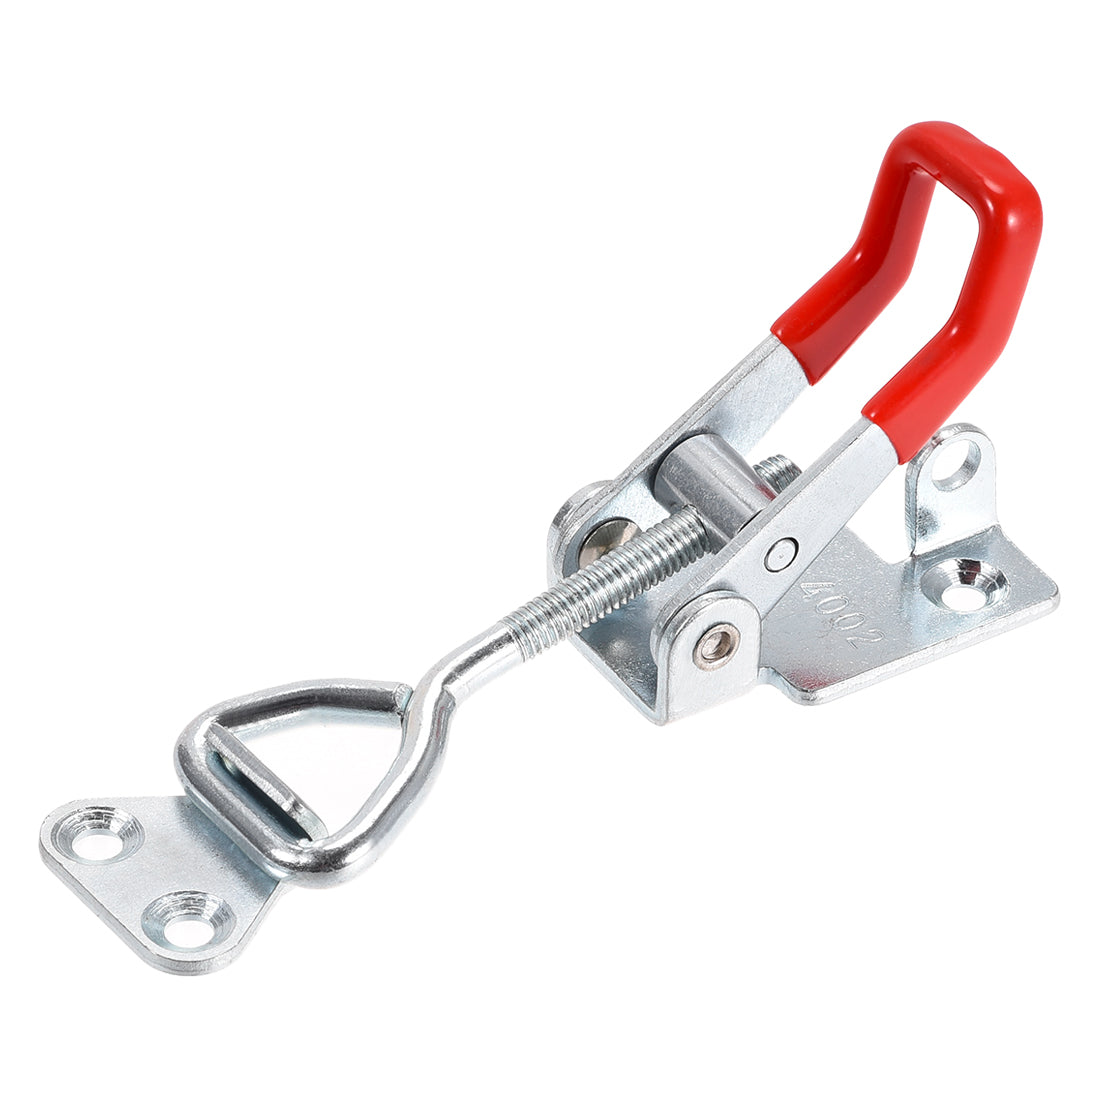 uxcell Uxcell 396lbs Holding Capacity Iron Pull-Action Latch Adjustable Toggle Clamp